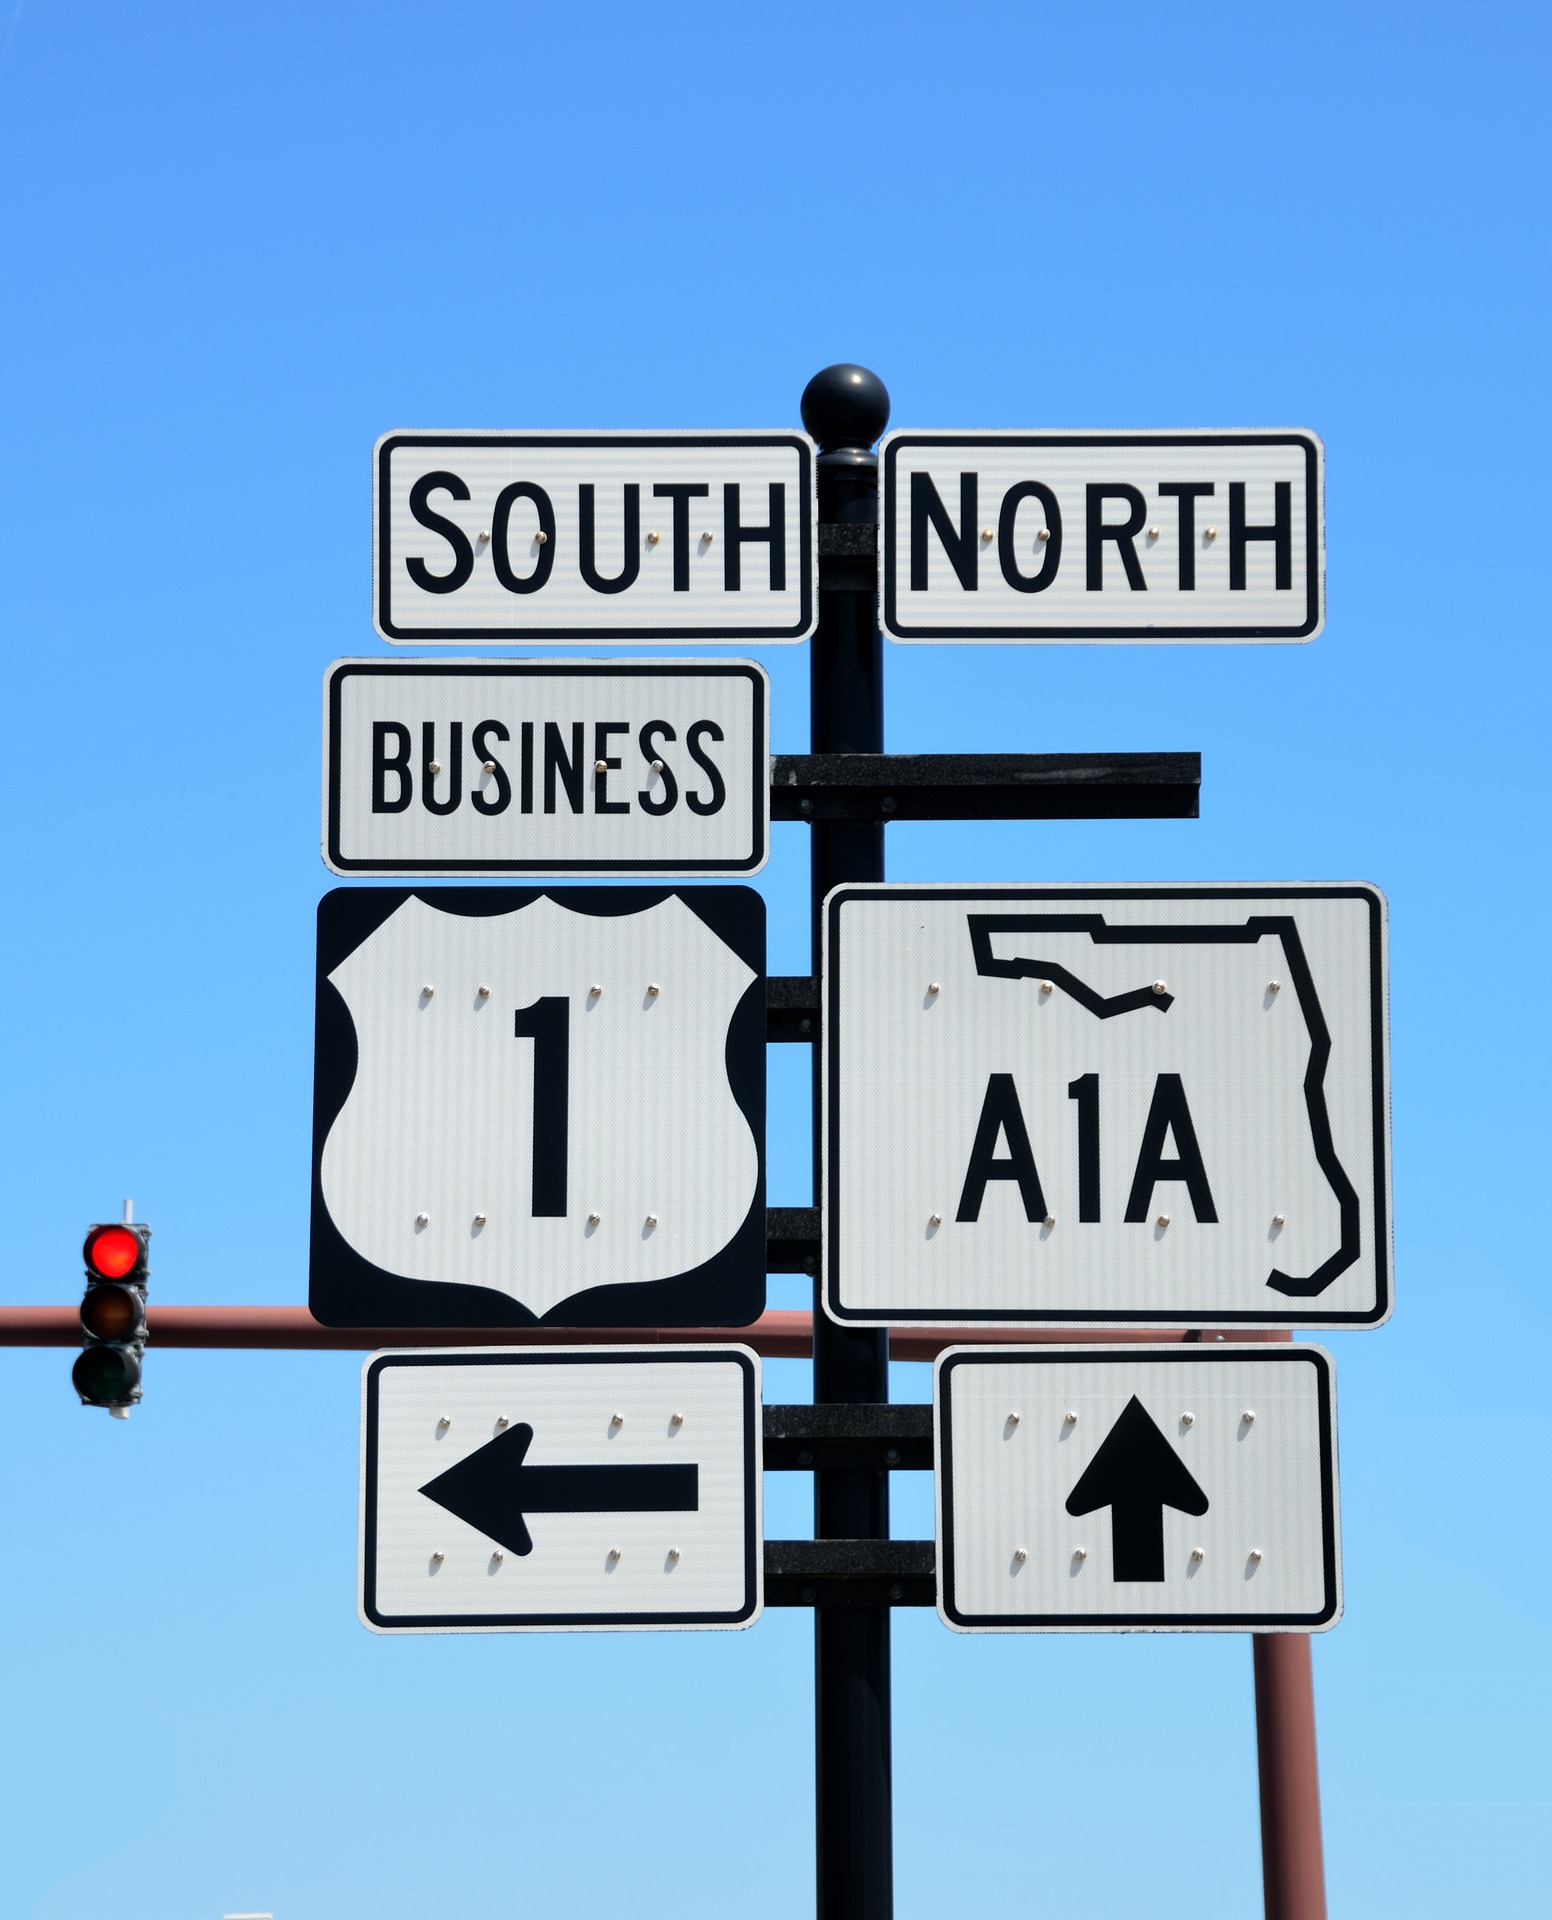 Image depicts a Street sign in Florida showing South Business US 1 and North A1A with arrows pointing to the correct direction depending on which way you are headed